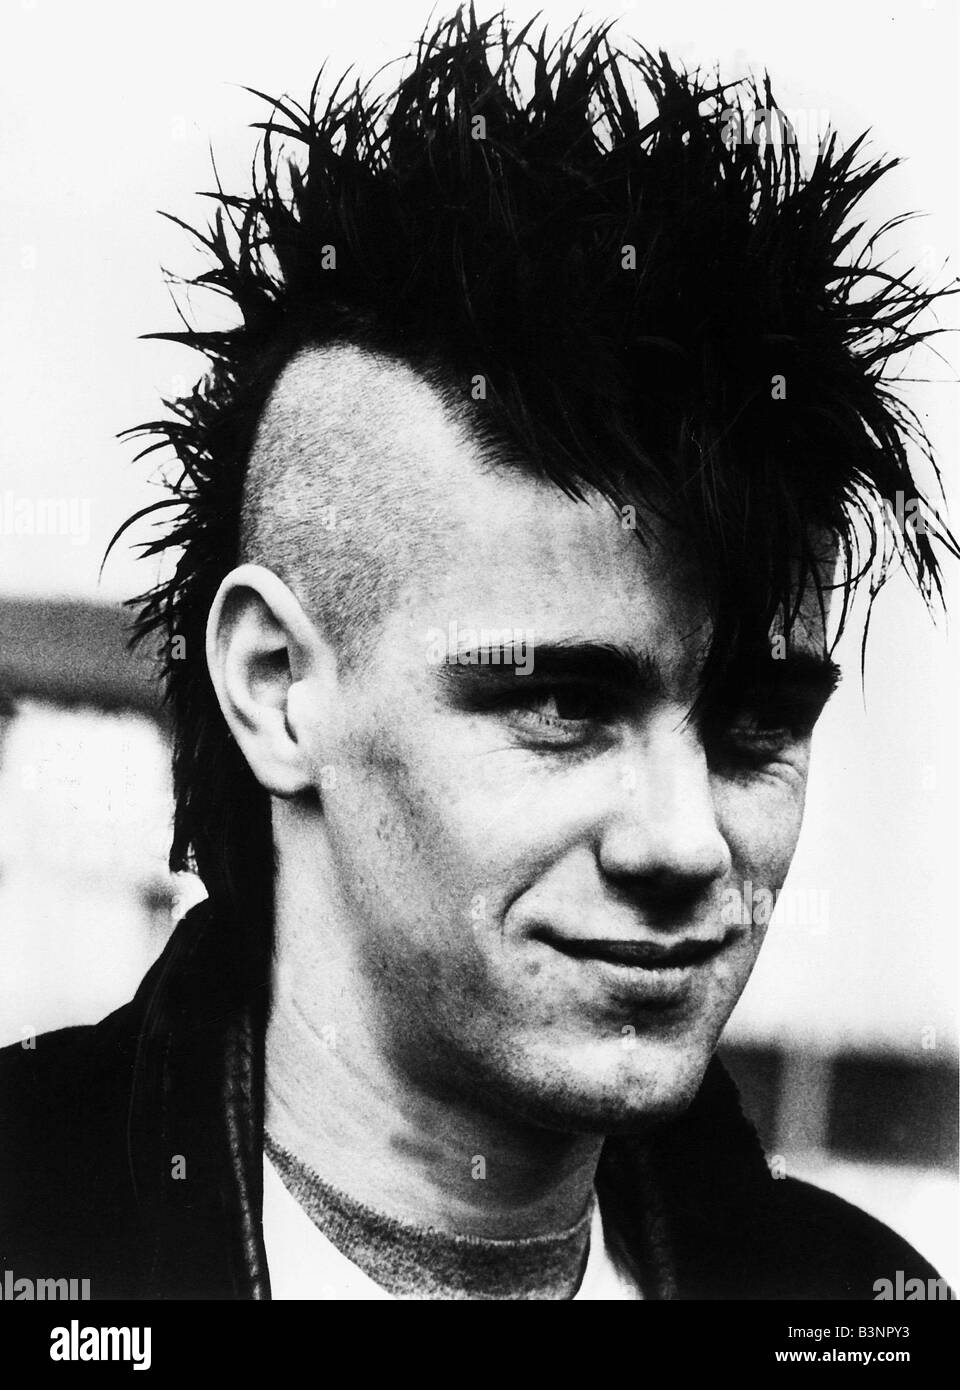 Andrew Askins Geography student from Penrith April 1983 Mohican haircut punk rocker Stock Photo